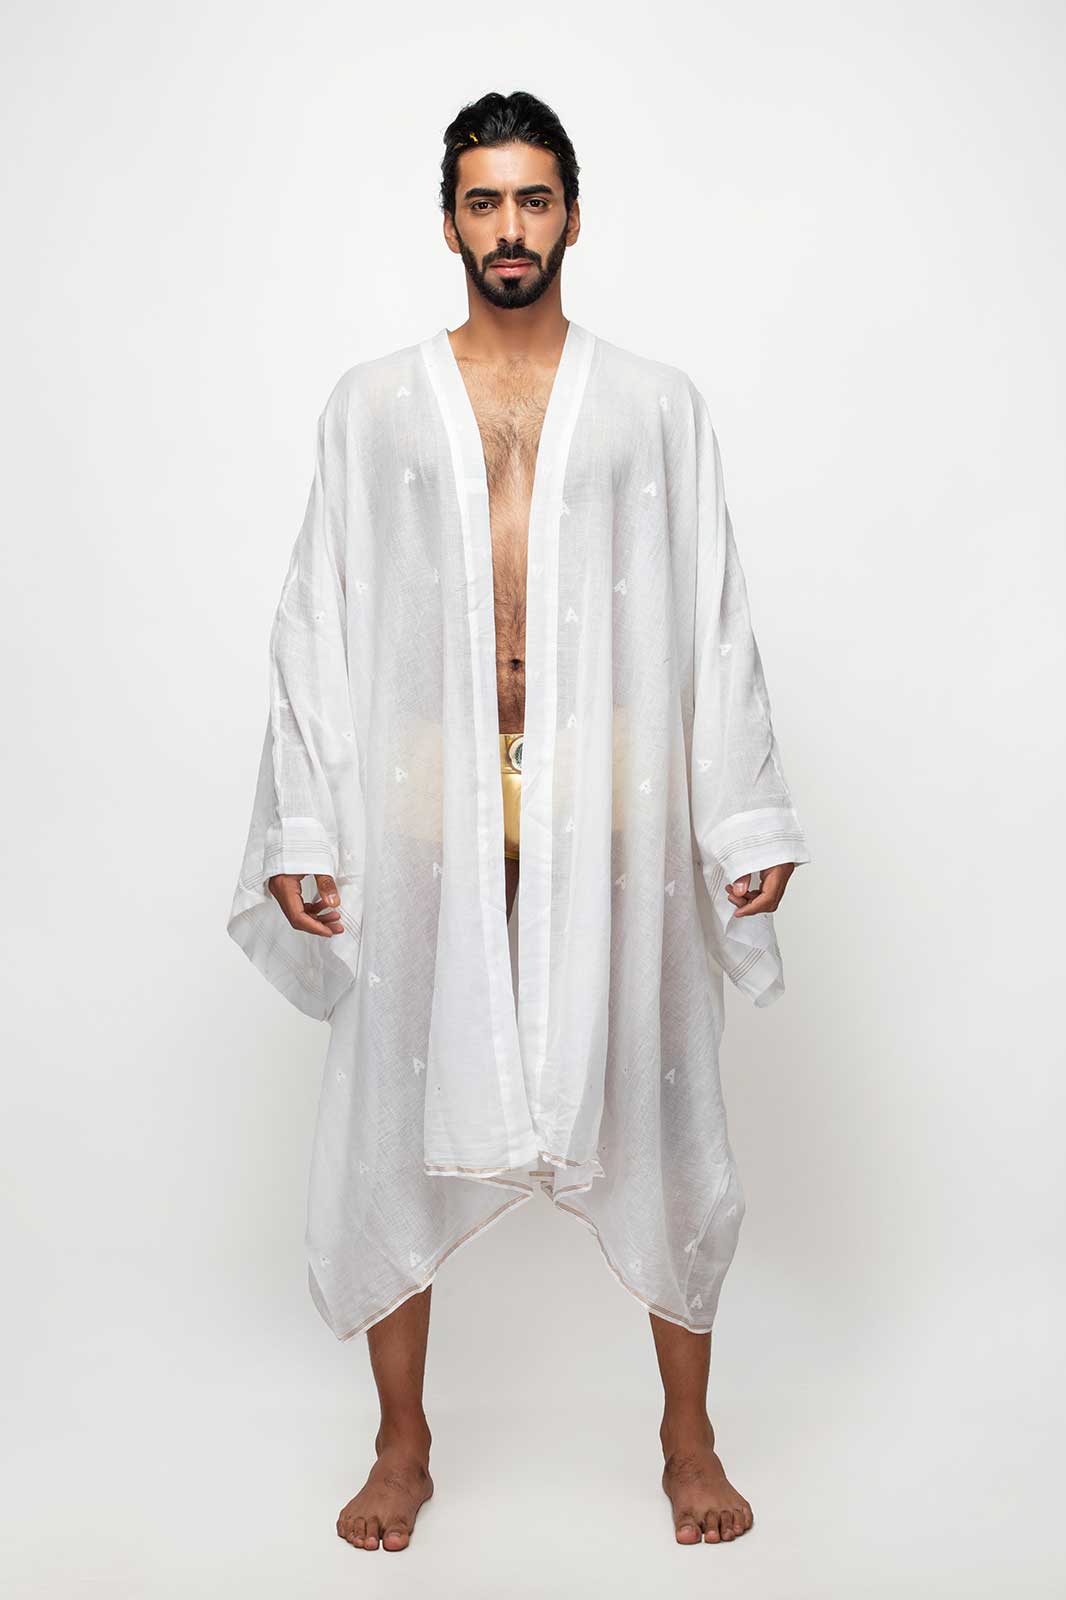 Men kaftan clothing, Cotton kaftans, Cotton kaftans online, Men's cotton clothing, Tunic for men, Men's long suit, Sepia Stories, clothing style among men, White Cotton Kaftan, Organic Handmade clothing Brand In India